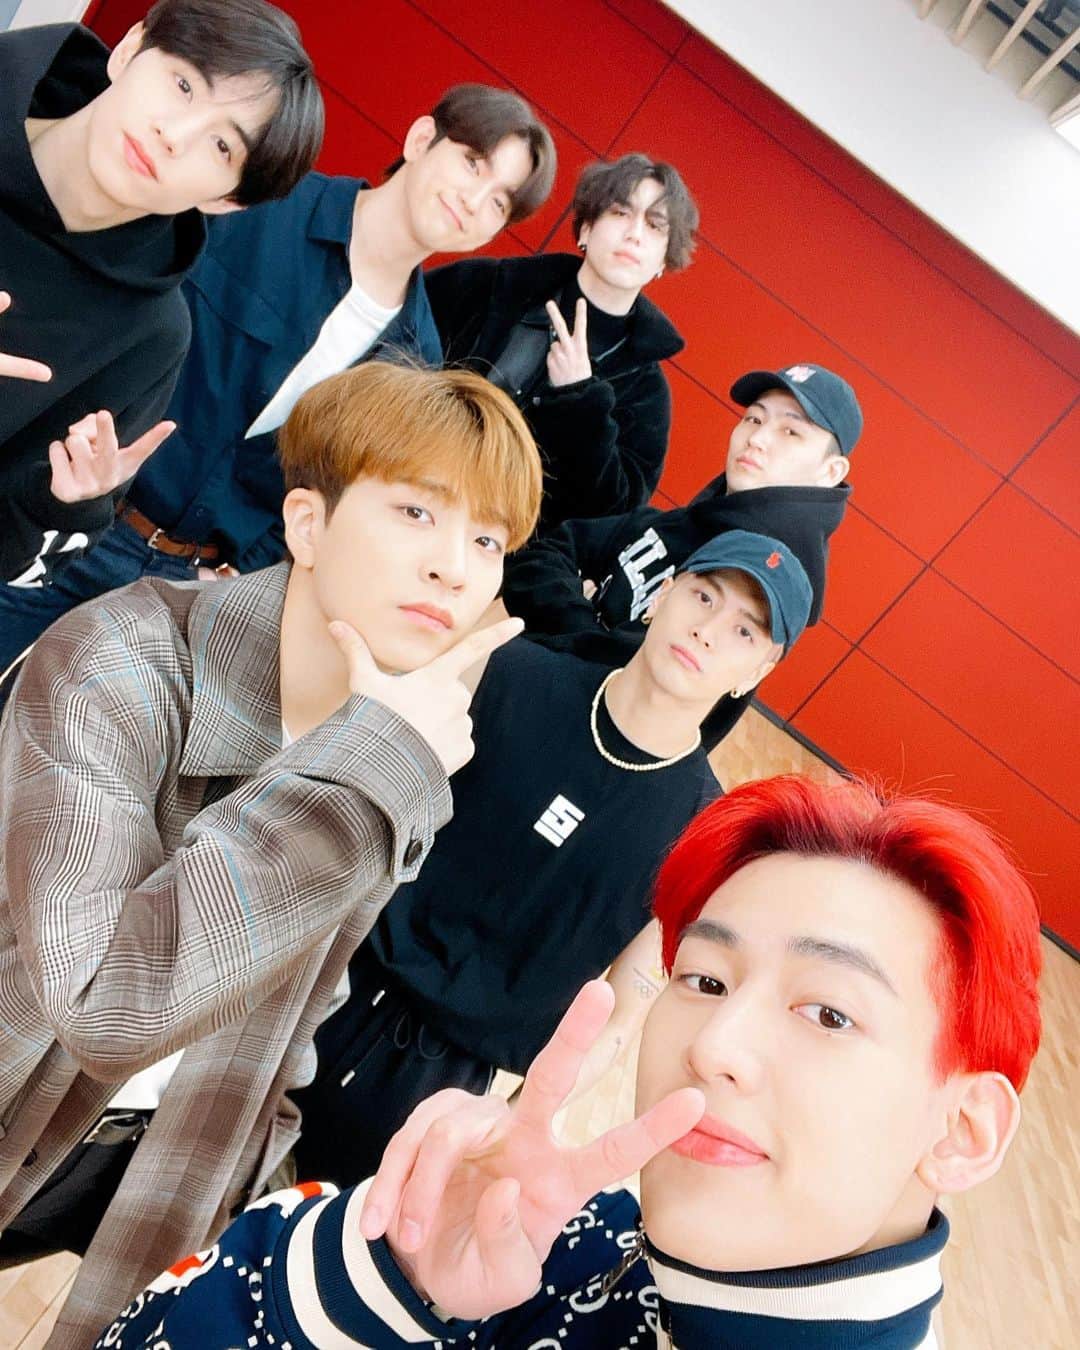 GOT7のインスタグラム：「[ #Piece_Of_GOT7 #💚 ]  아가새는 GOT7의 존재의 이유 의미 끝과 시작🐥 The most important piece💕  I GOT7 is GOT7's reason for existence, the beginning and the end🐥 The most important piece💕  #GOT7 #갓세븐 #IGOT7 #아가새 #GOT7_BreathofLove_LastPiece #GOT7_Breath #GOT7_LASTPIECE」